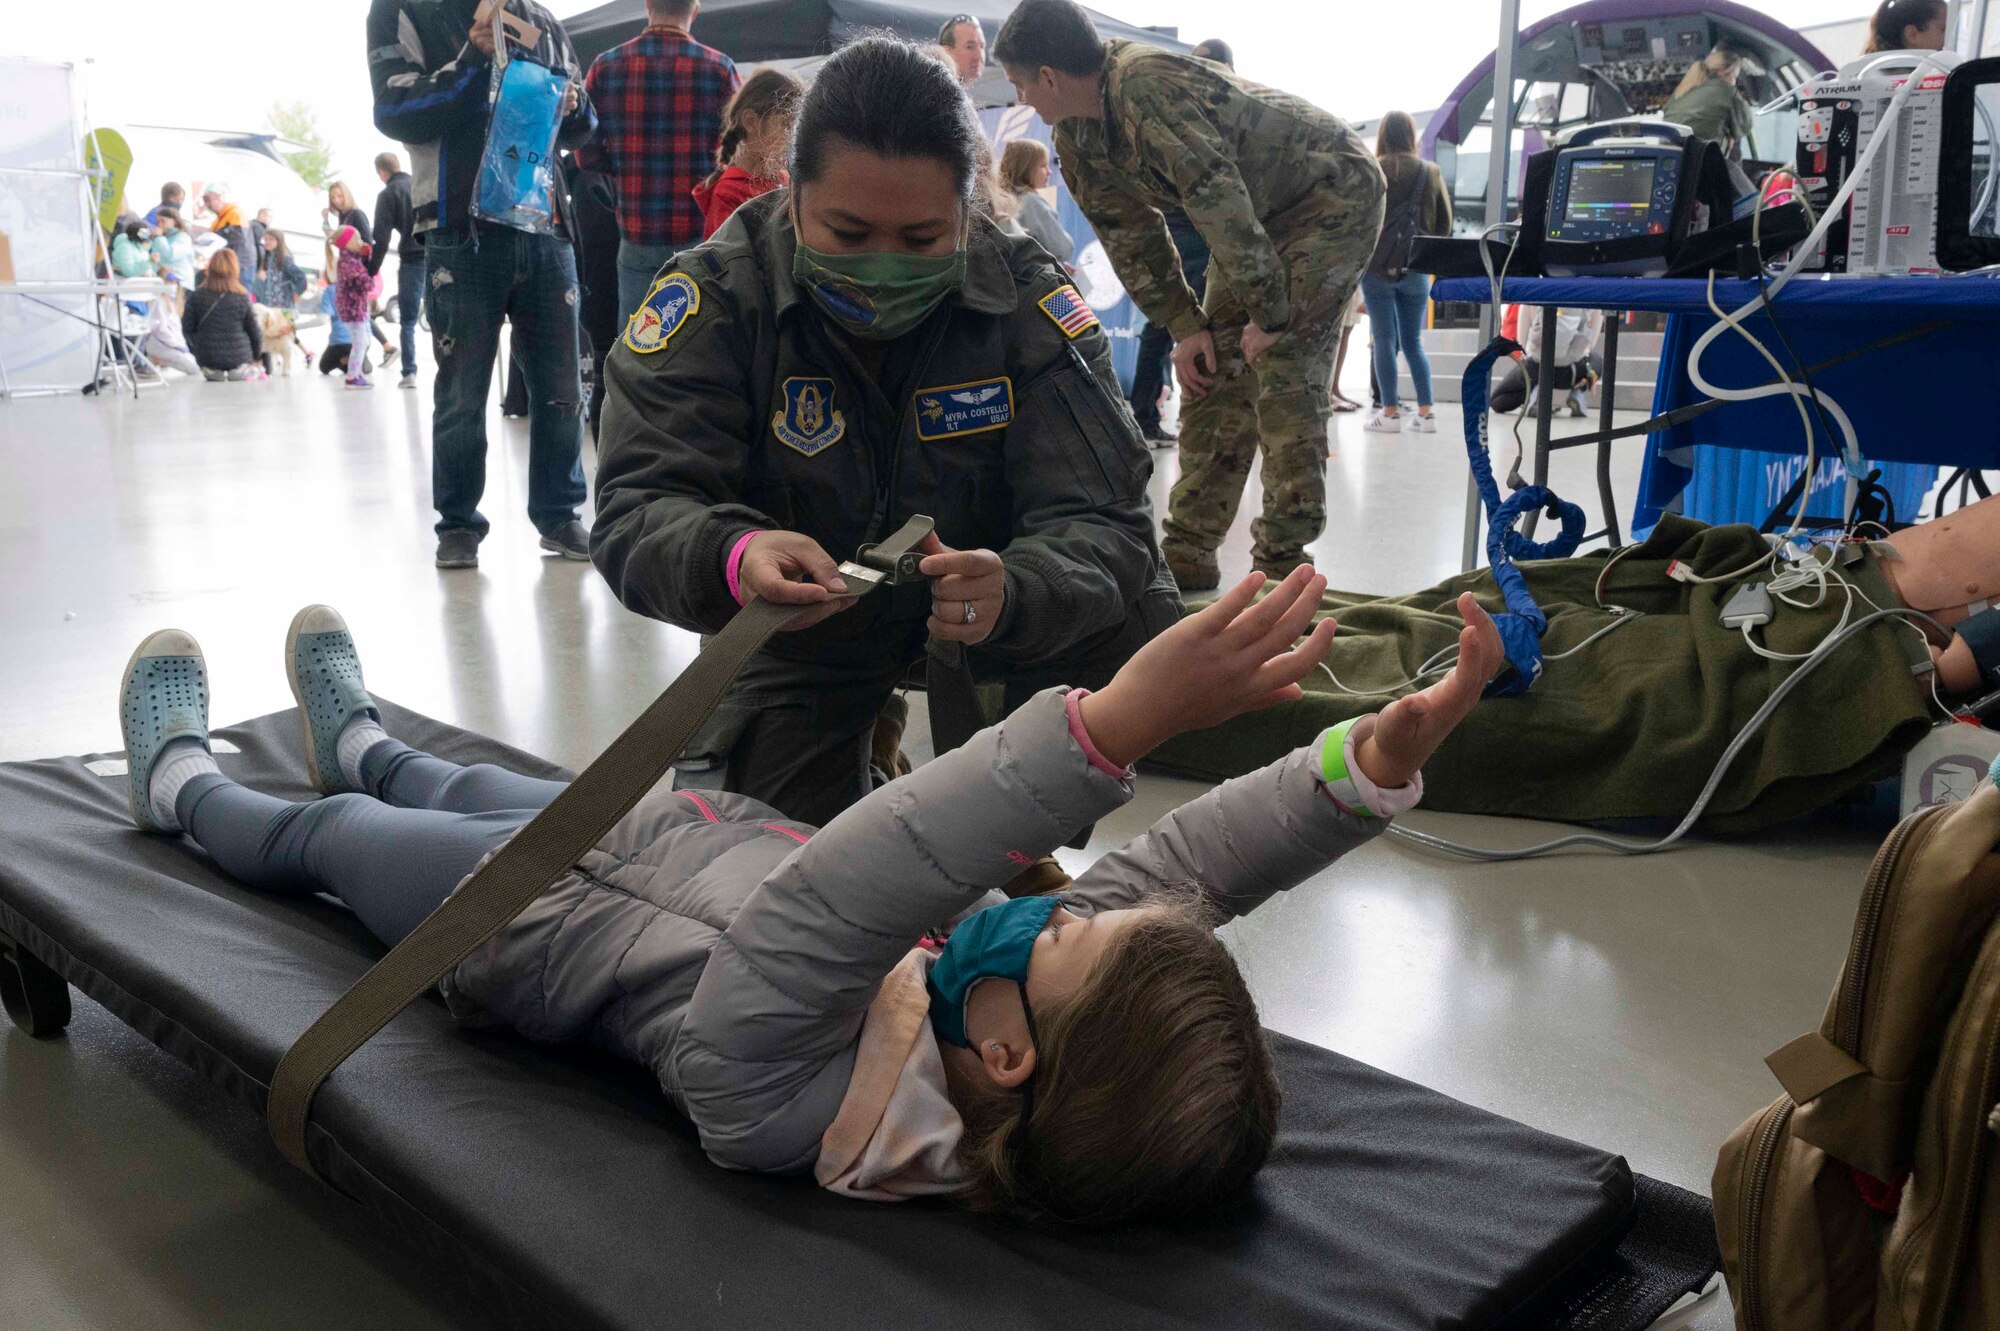 1st Lt. Myra Costello, 934th Aeromedical Evacuation Squadron, shows a young girl how patients are secured on a stretcher at the 7th Annual Girls in Aviation Day hosted by the Women in Aviation at the Flying Cloud Airport in Eden Prairie, Minn., on Sept. 25, 2021. After the 2020 event was cancelled due to the COVID-19 pandemic, participating in this year’s event was something the wing’s Reserve Citizen Airmen looked forward to.